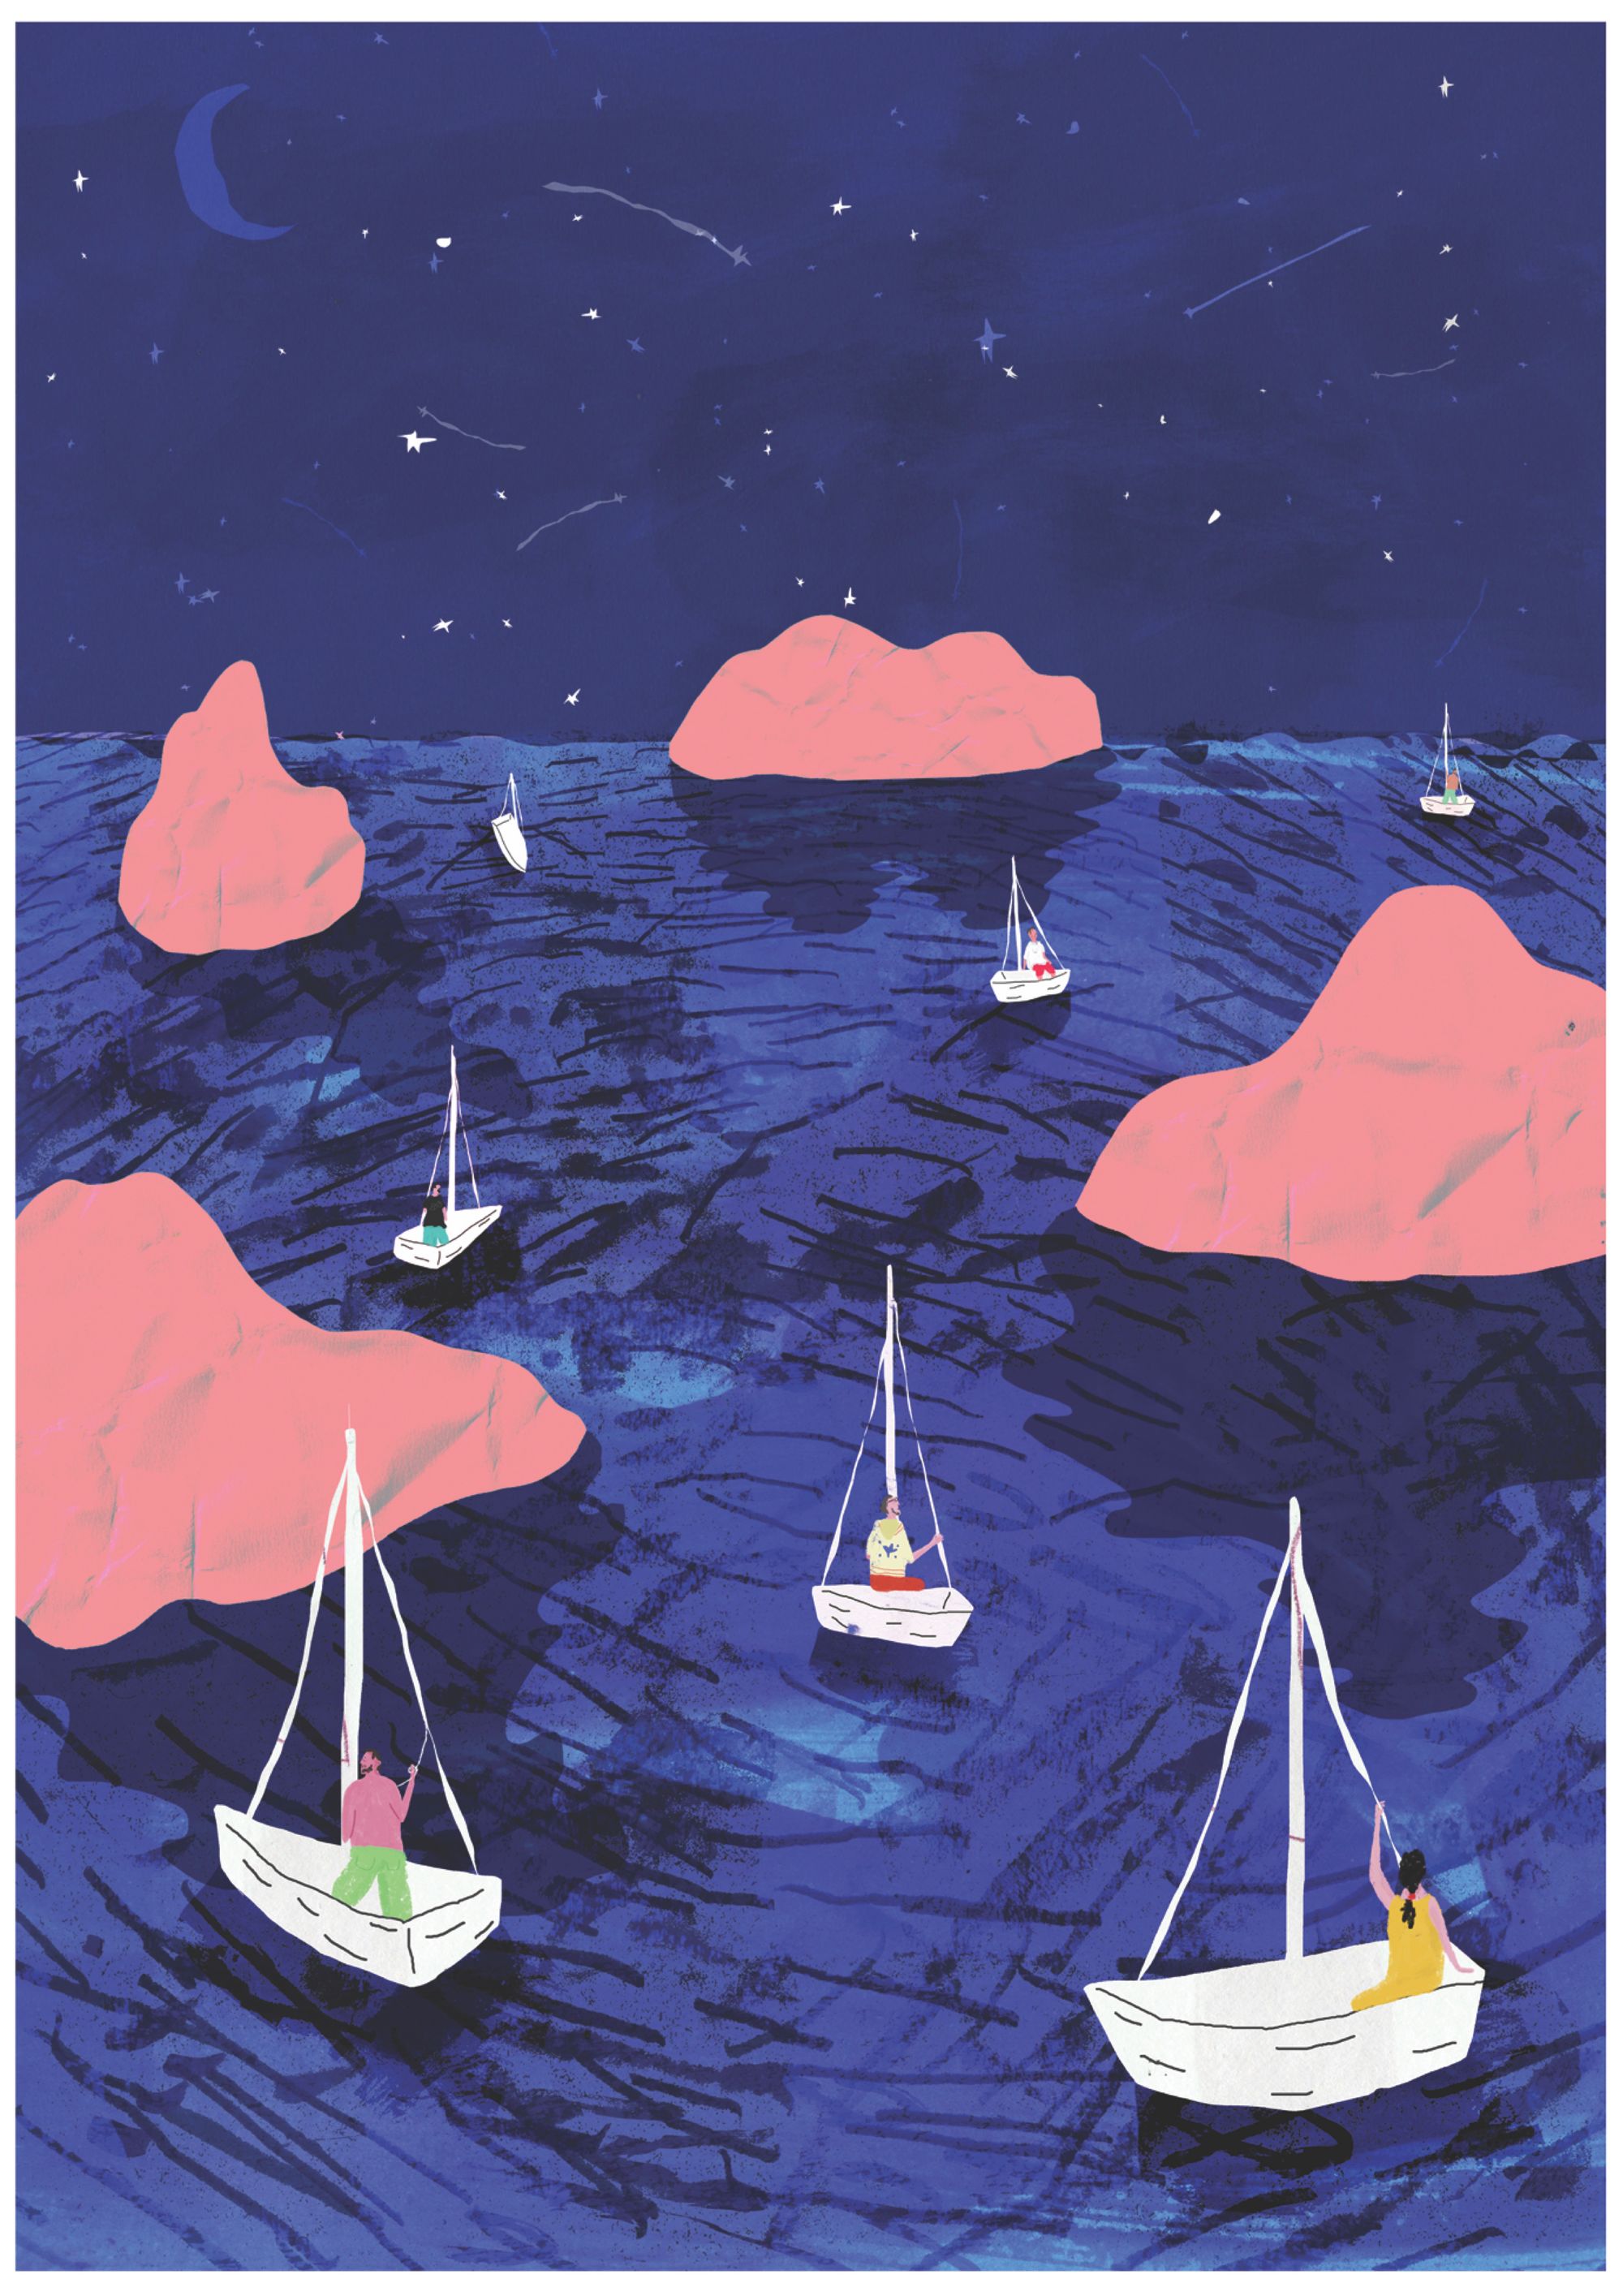 Illustration of people on sailboats on a bule sea, with pink rocks, against a starry night sky.